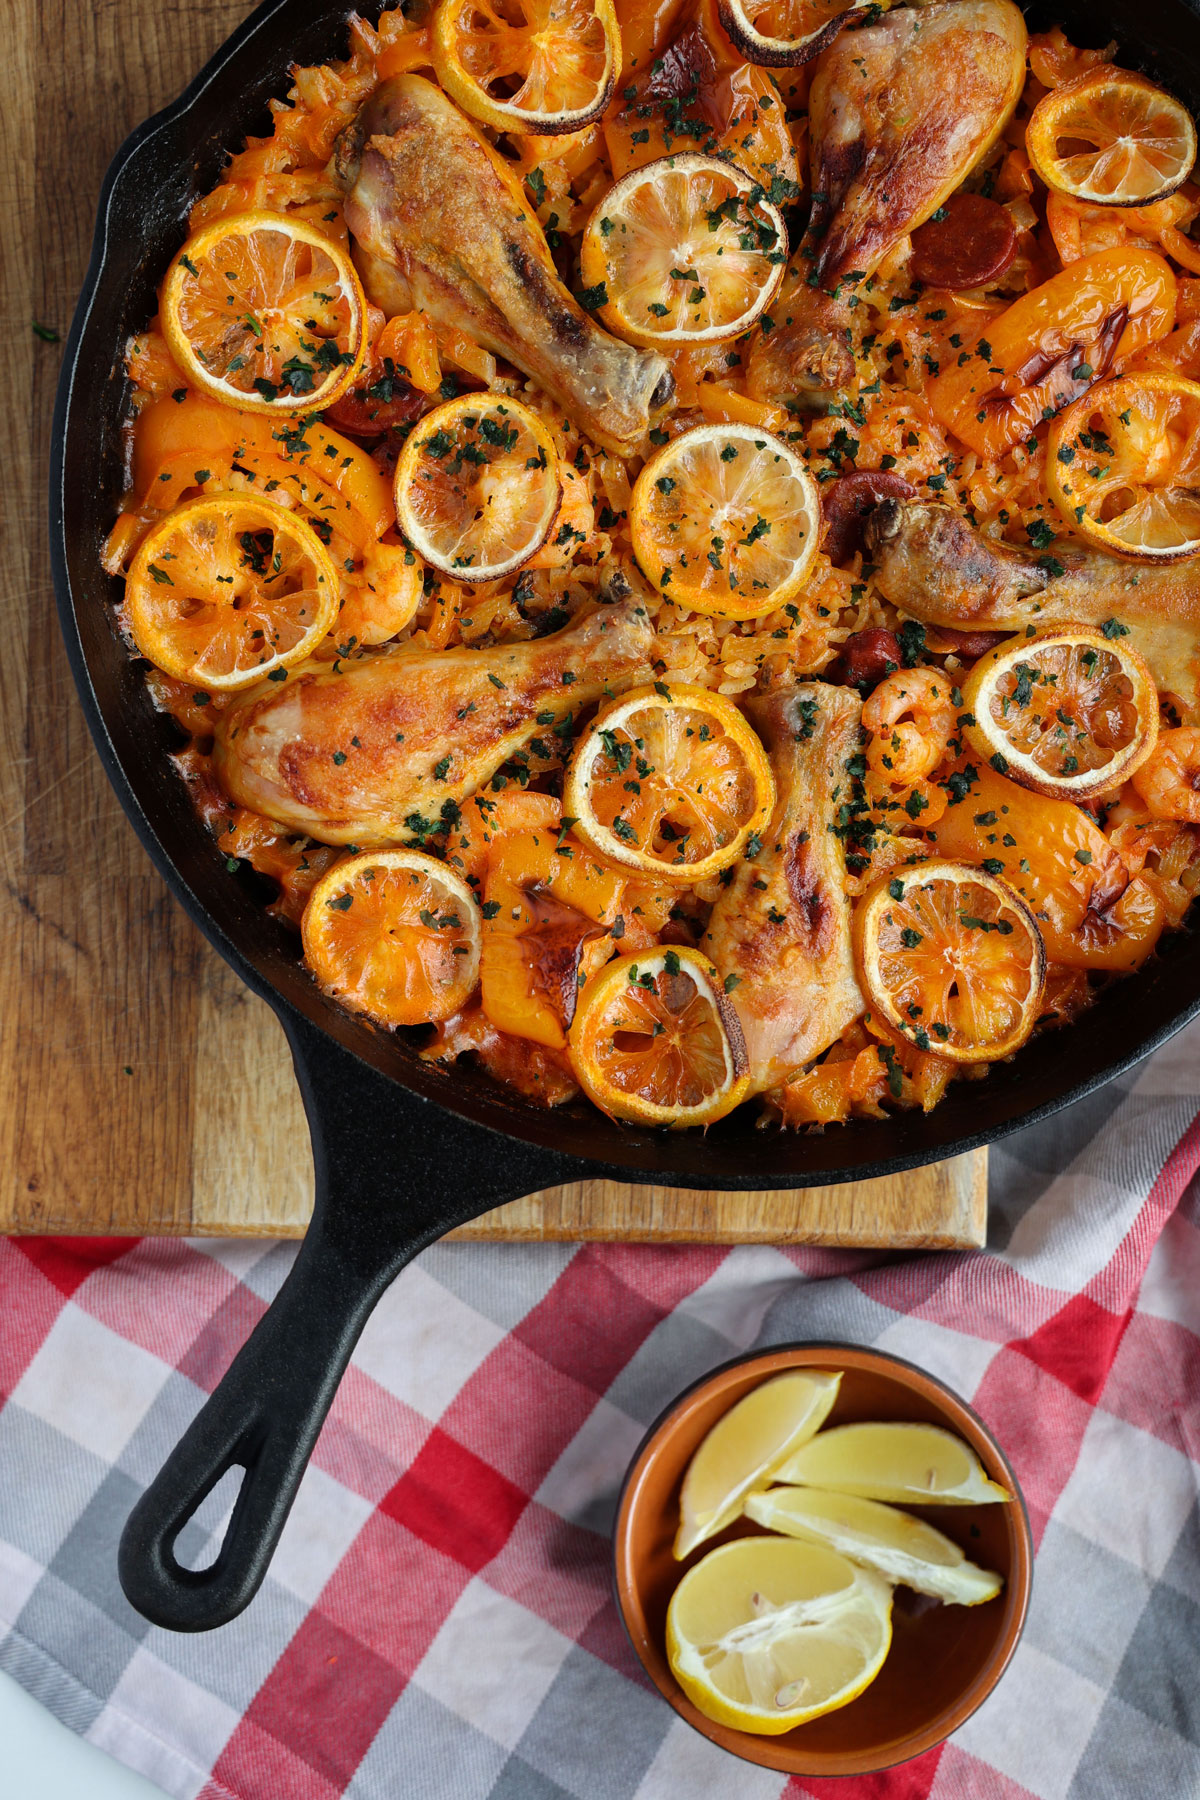 A bird-eye view - Paella with chicken and sliced lemon.